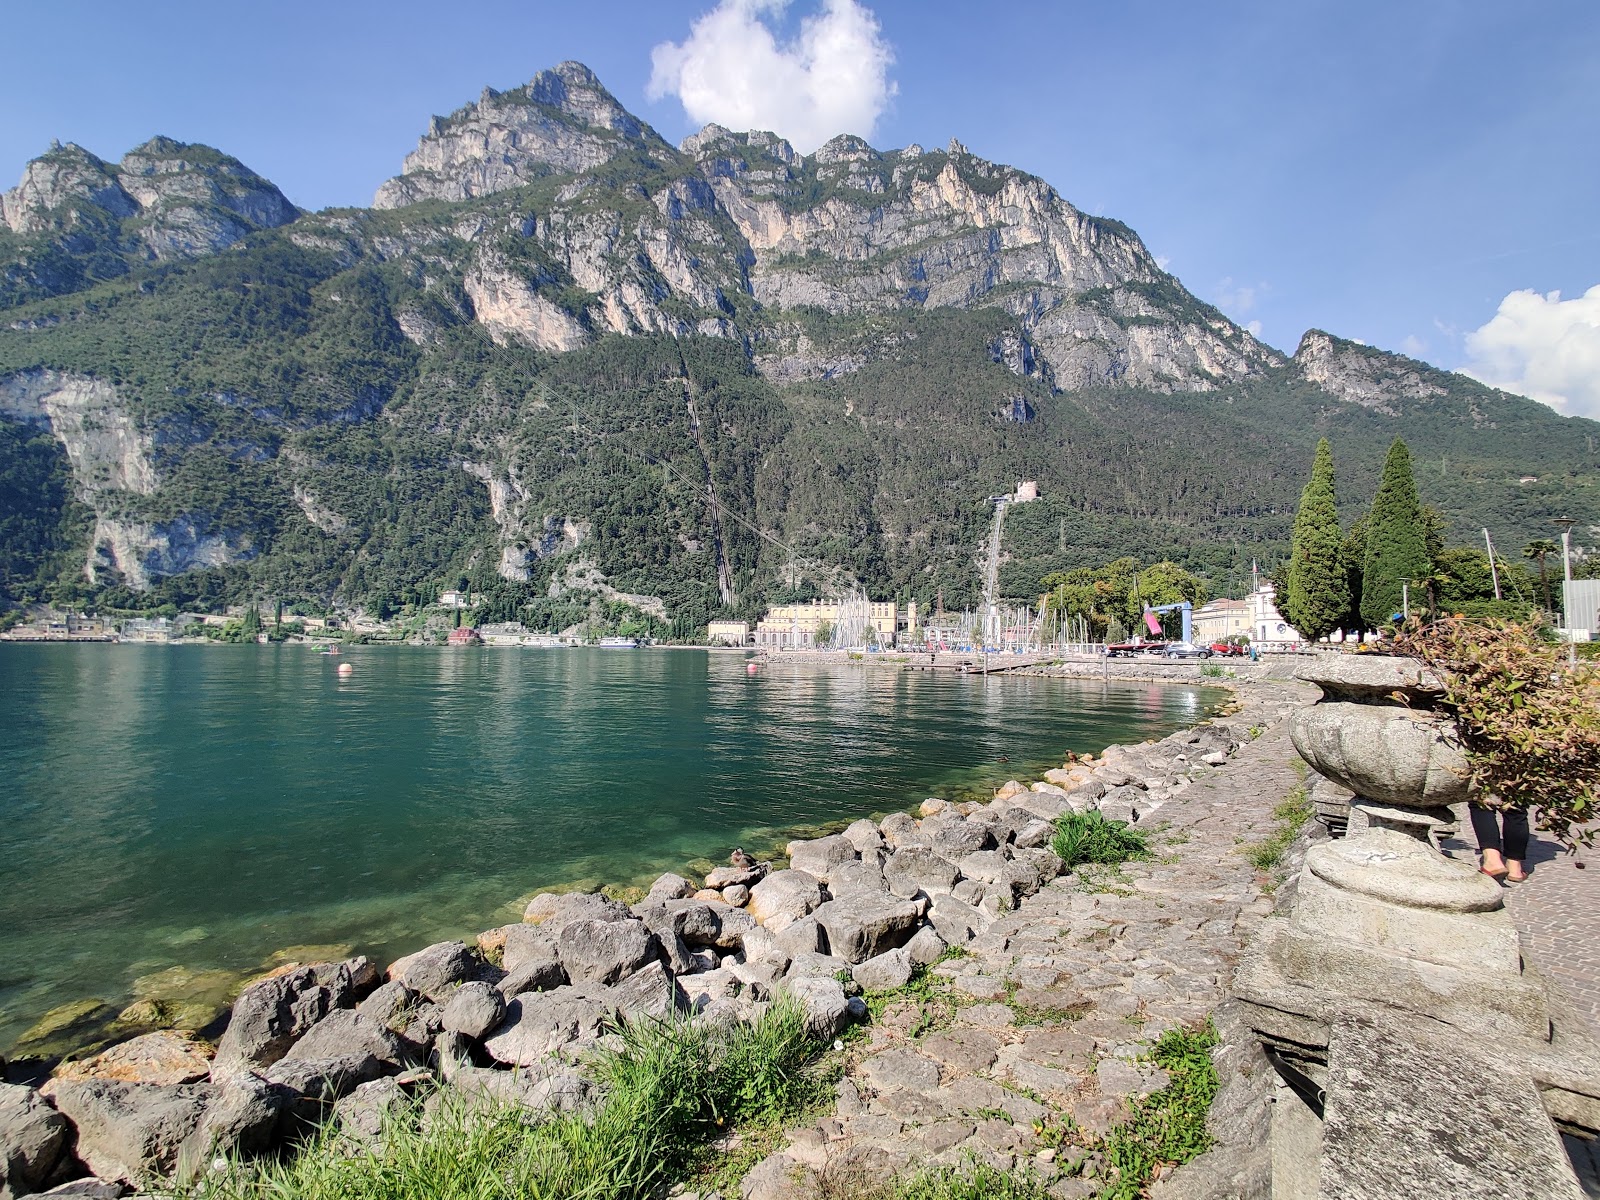 Photo of Spiaggia Riva del Garda - popular place among relax connoisseurs